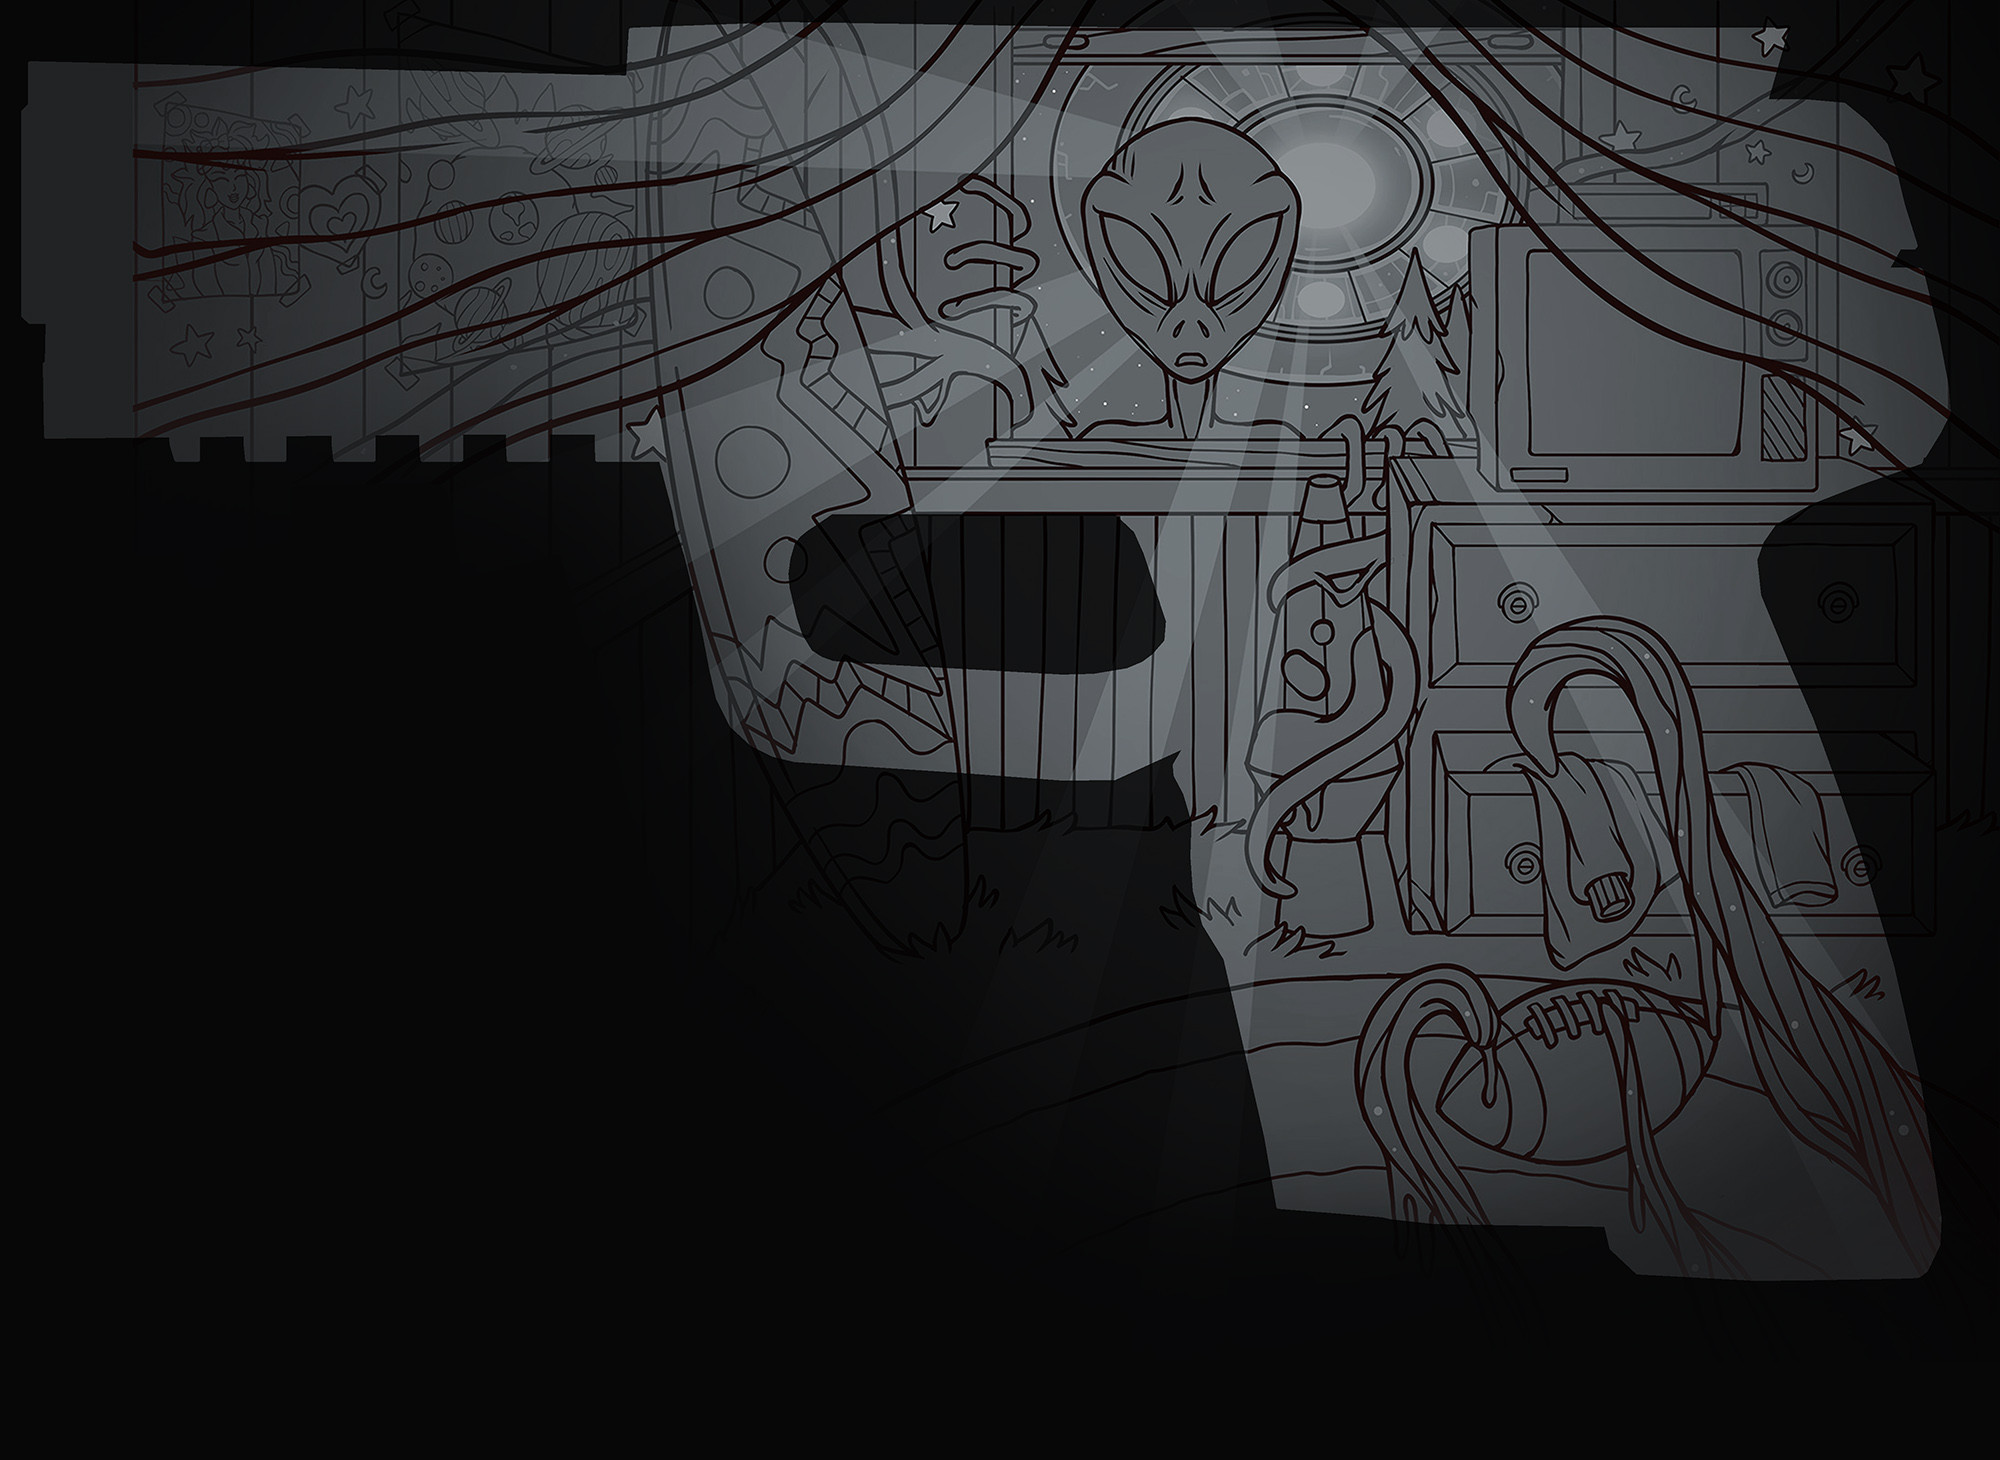 Final placement sketch for the Five-SeveN